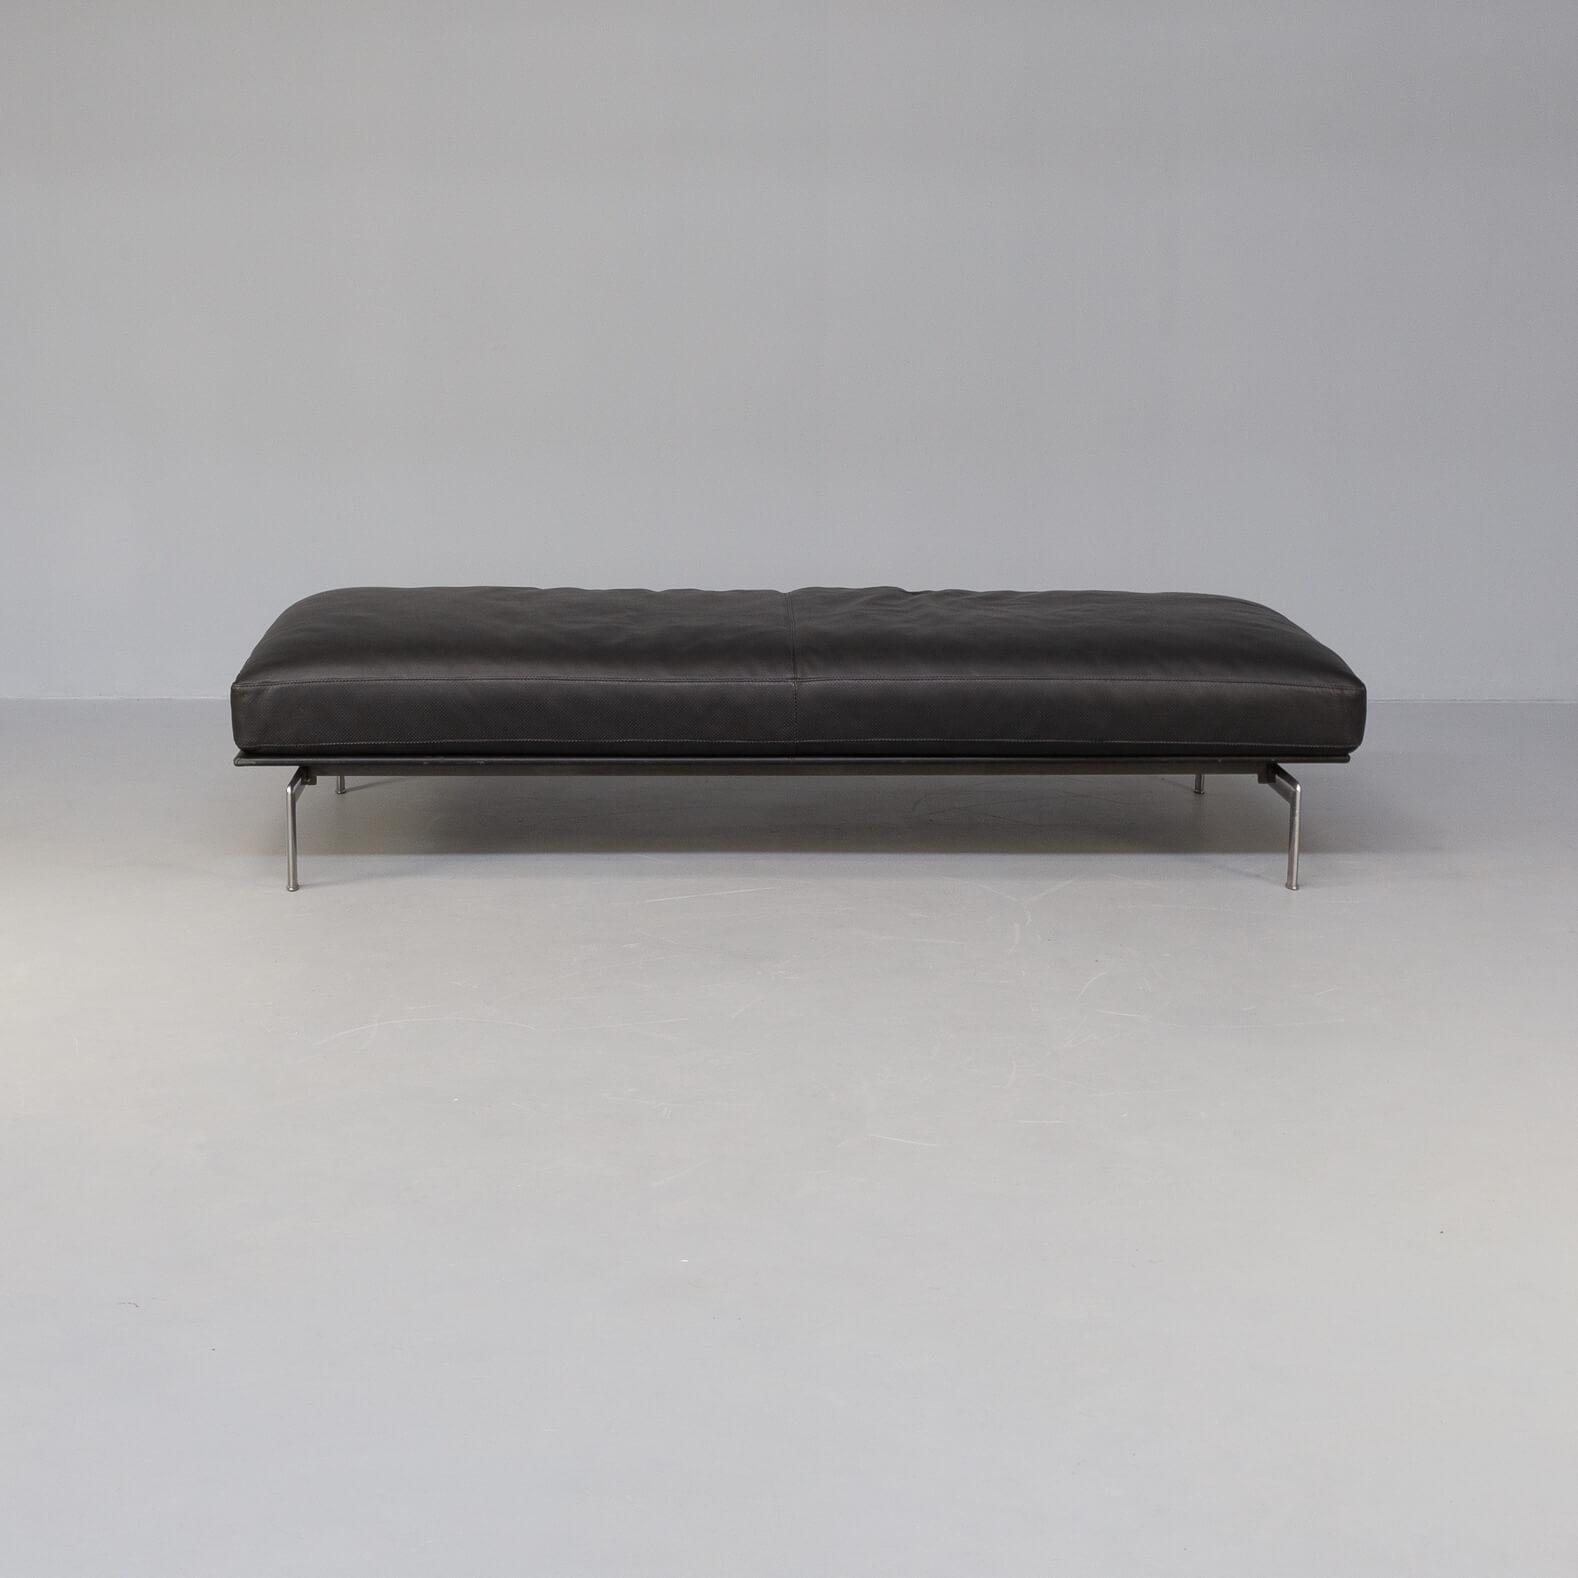 Mid-Century Modern 80s Antonio Citterio and Paolo Nava Black Leather “Diesis” Daybed for B&B Italia For Sale